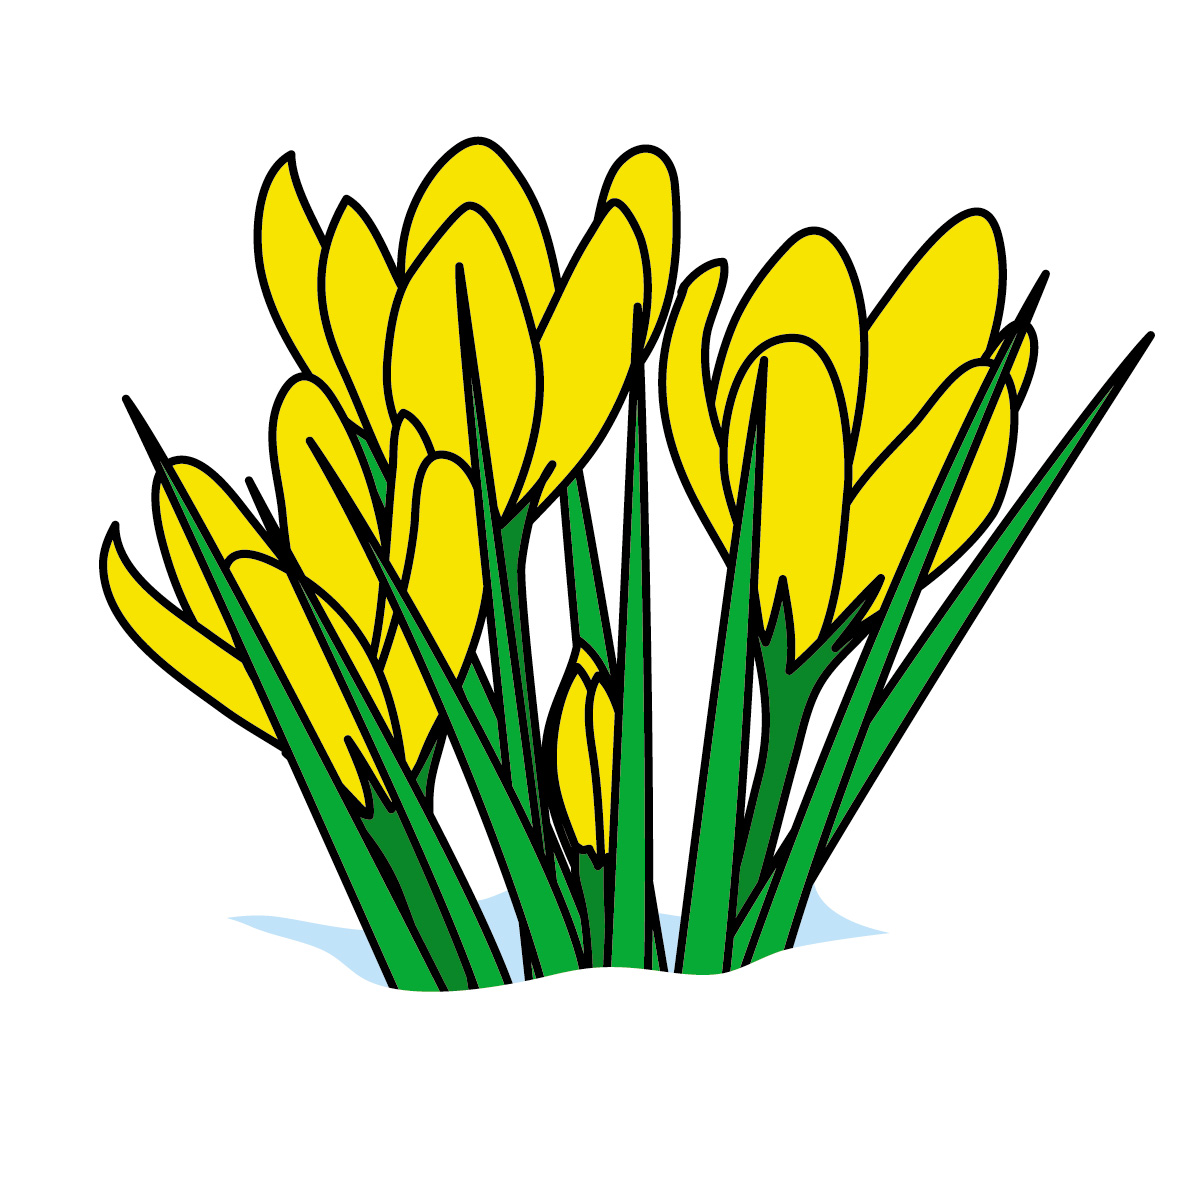 Spring Clip Art | Clipart Panda - Free Clipart Images